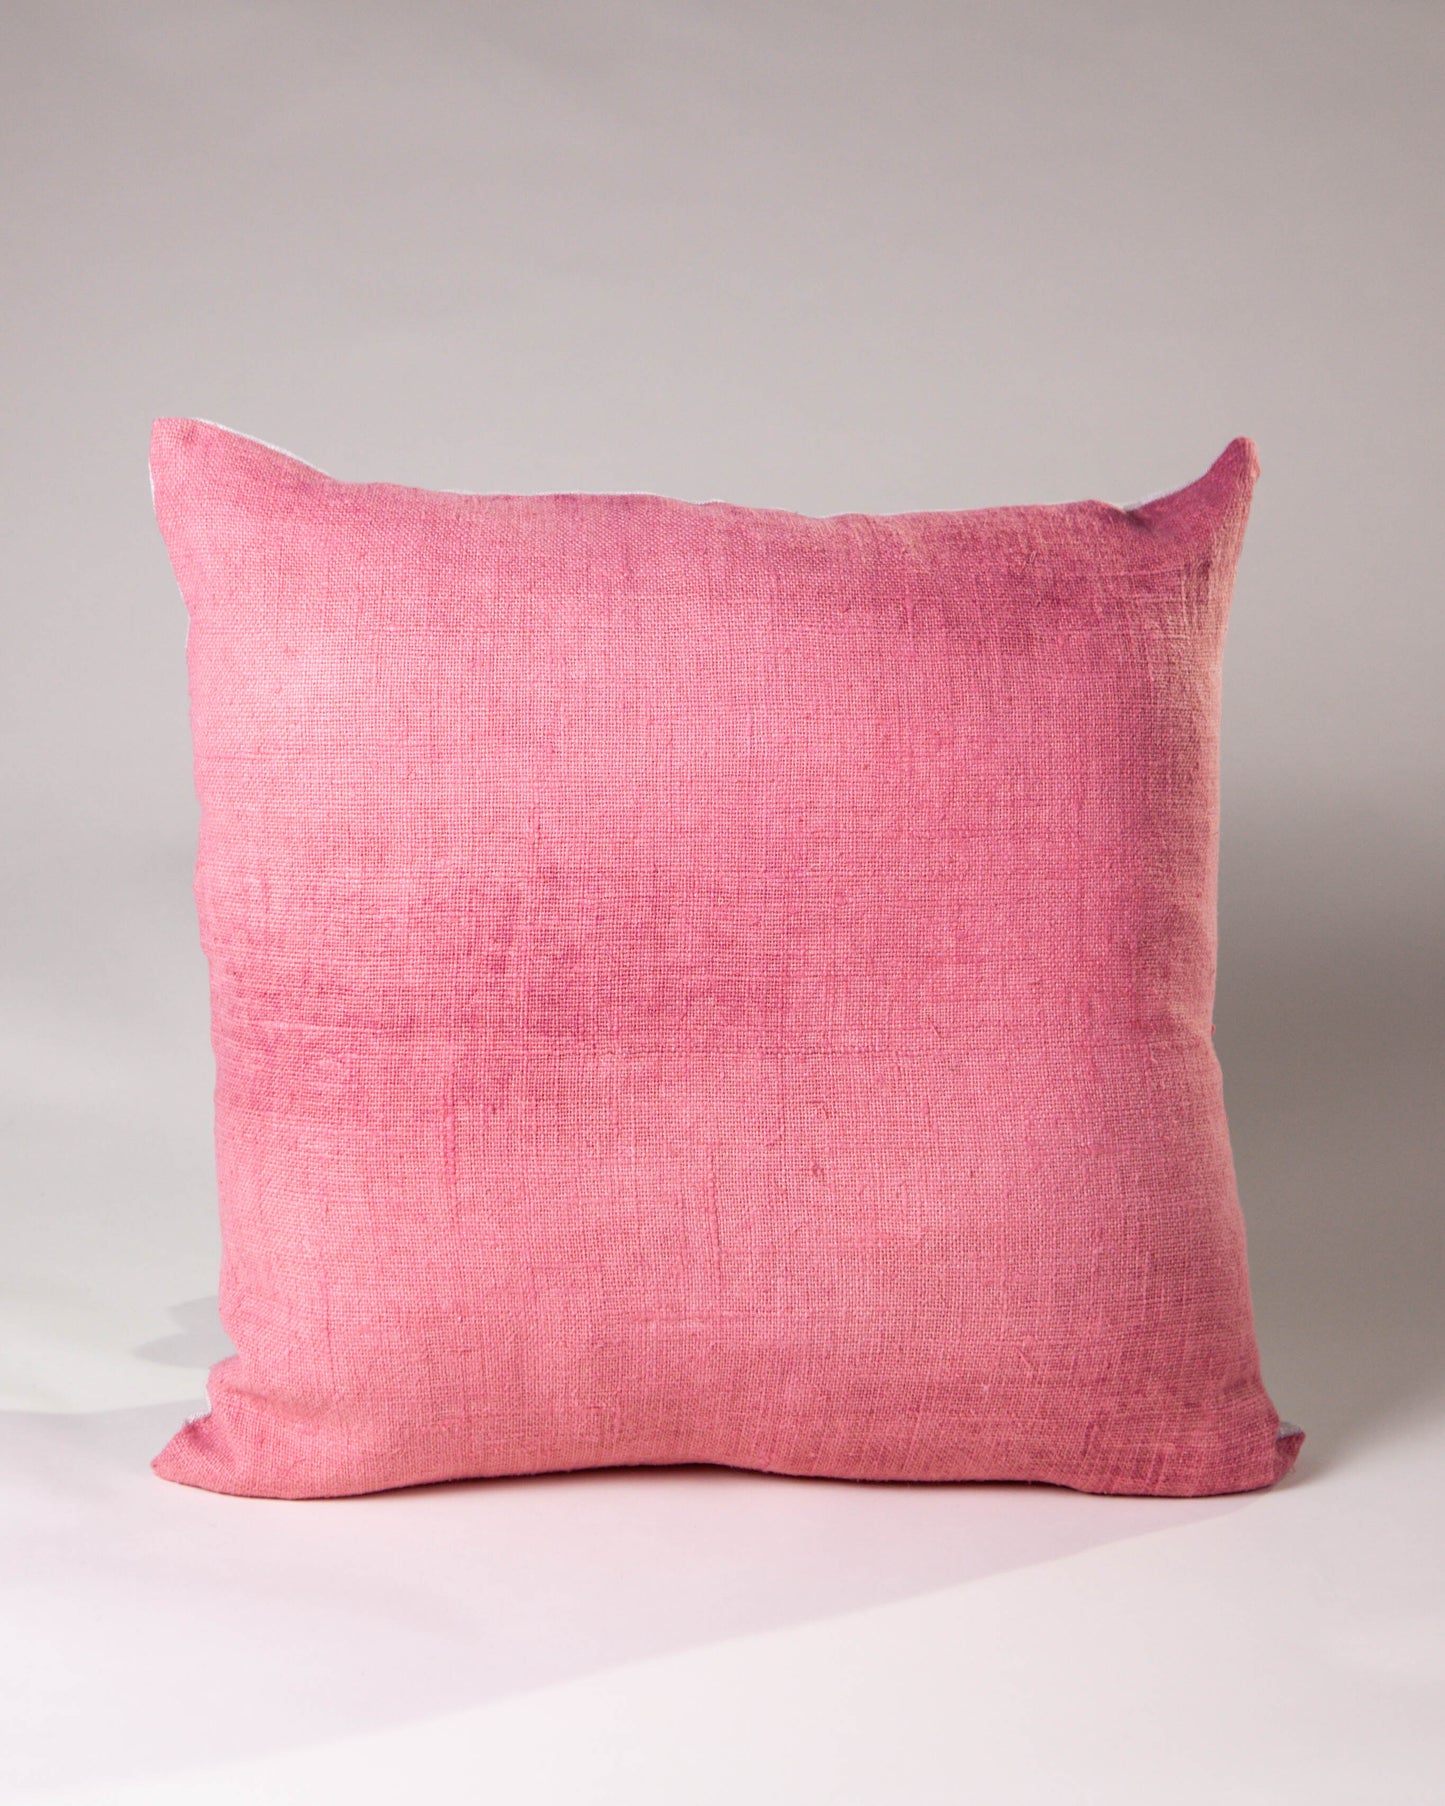 Hand-painted vintage linen pillow pink